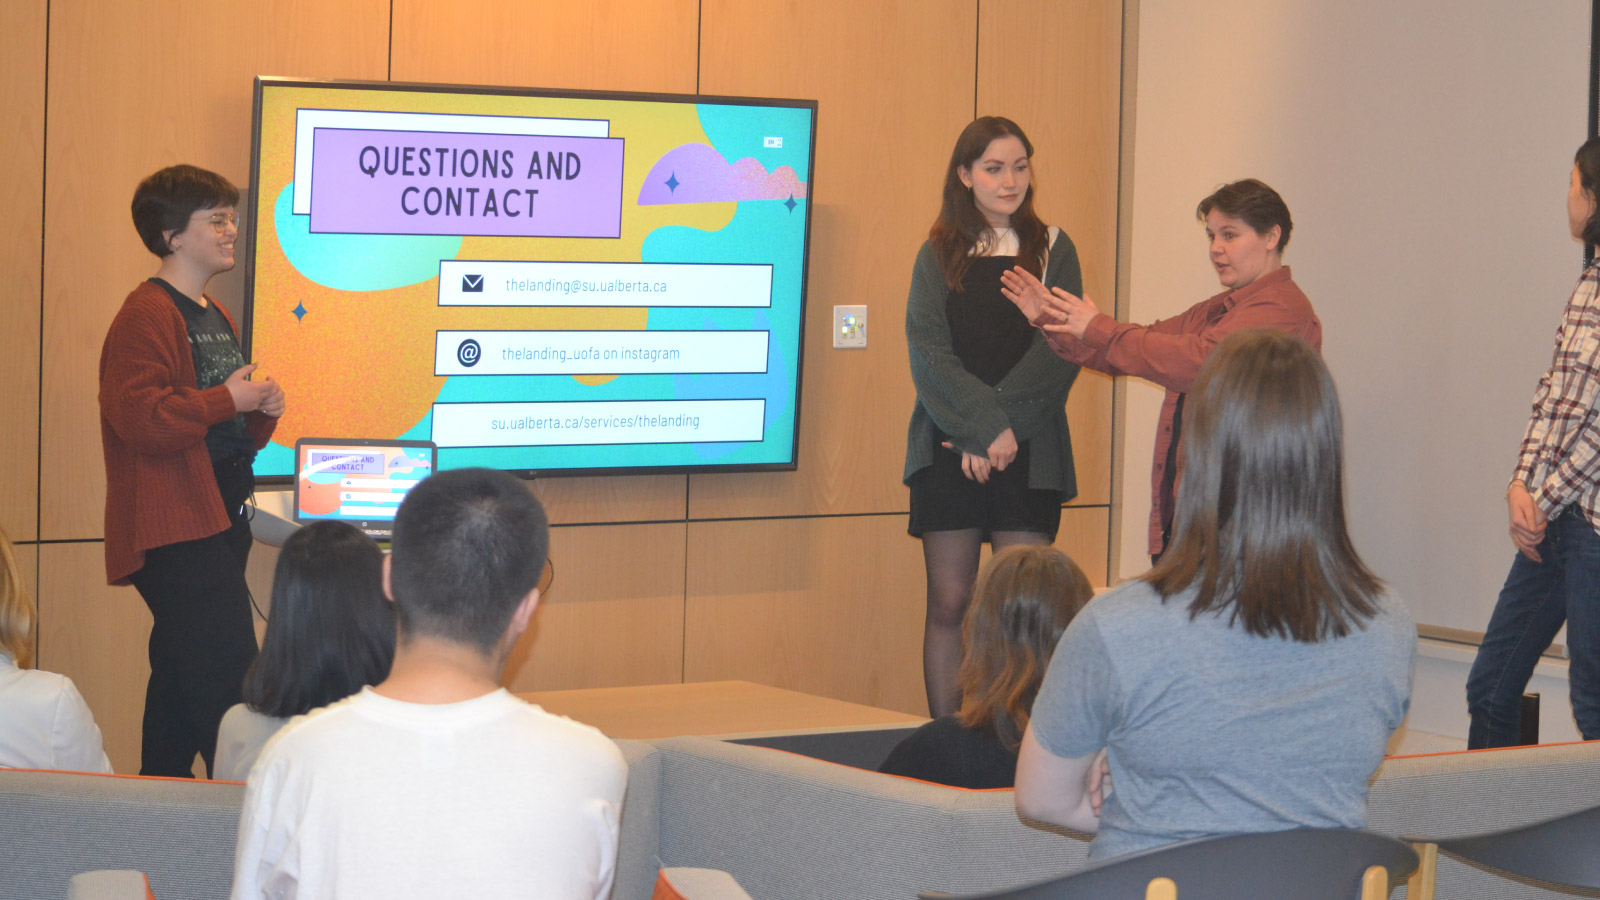 Presenters stand in front of a group of students with a question and contact slide behind them.